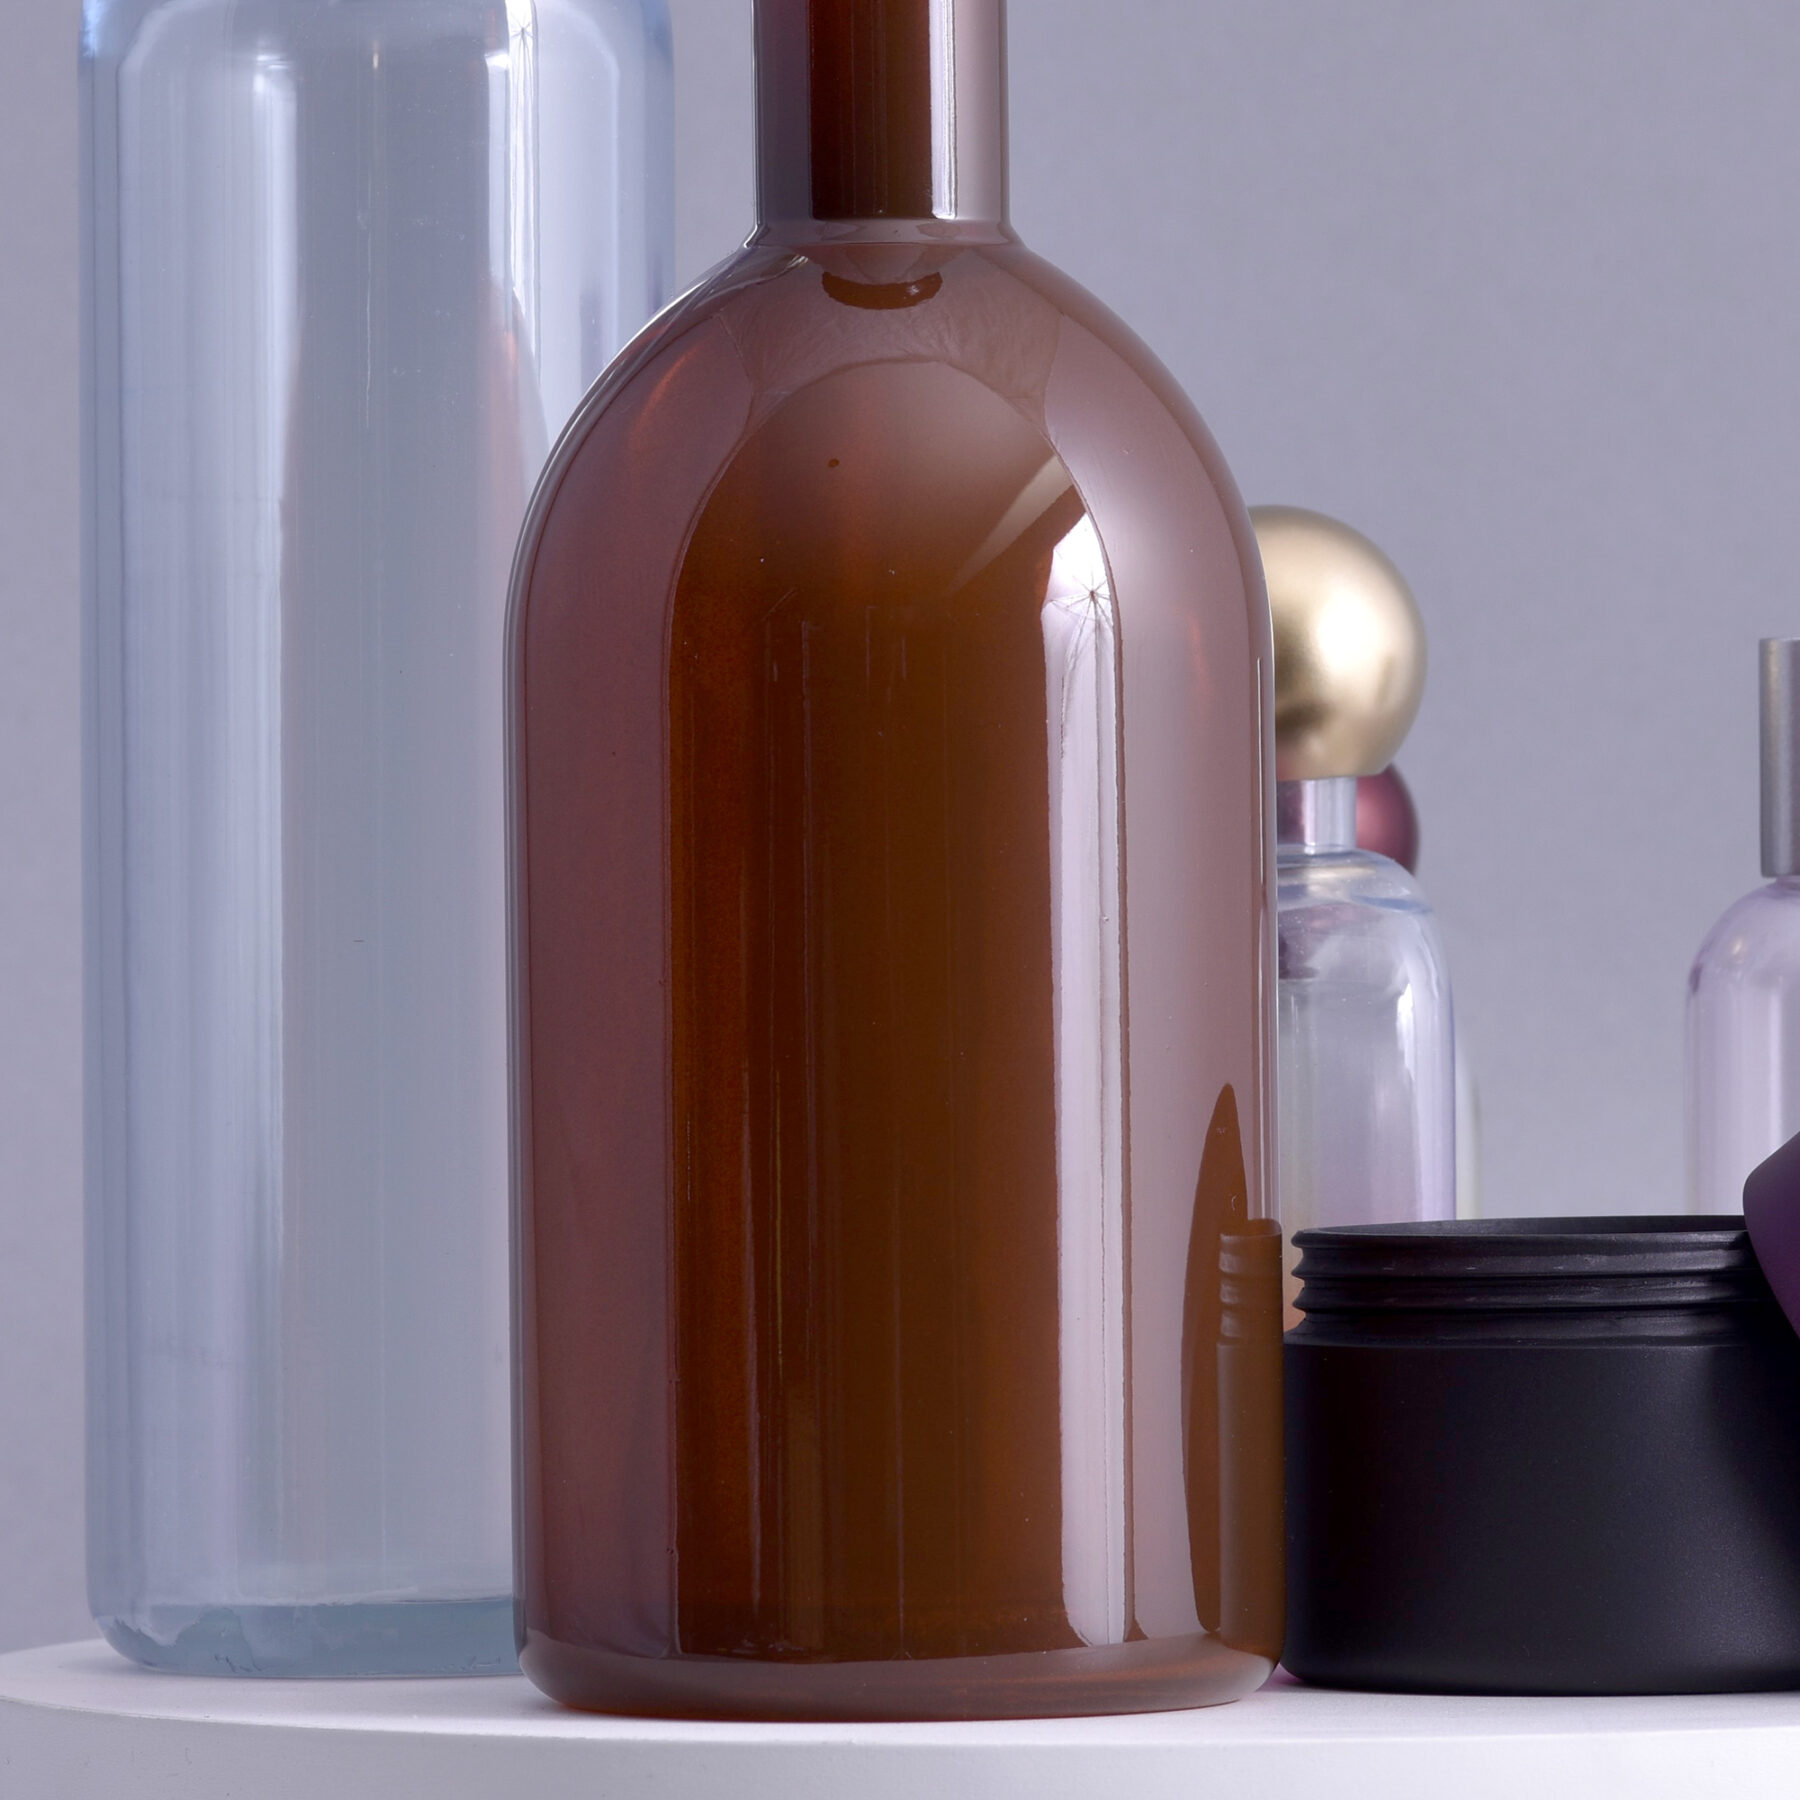 Silky smooth 3D printed bottles